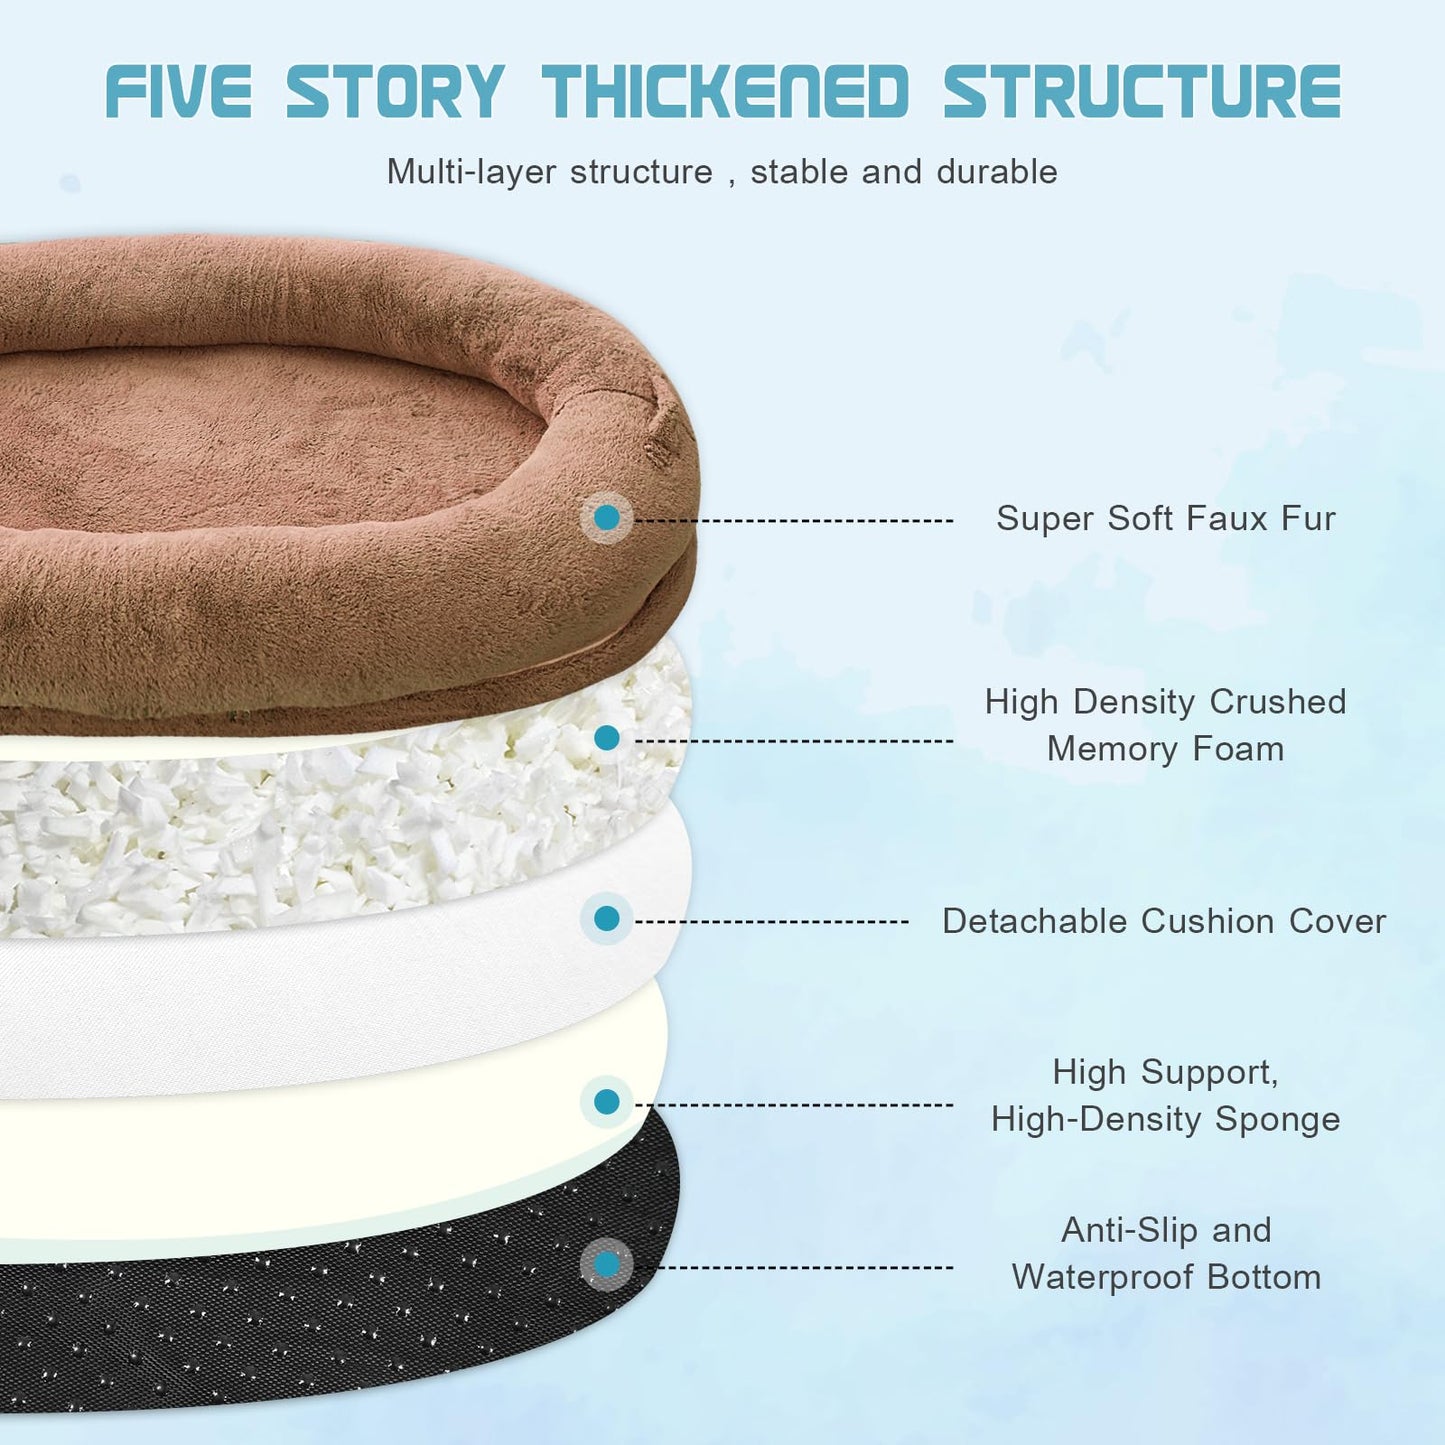 Dog Beds For Humans Size Fits You And Pets Washable